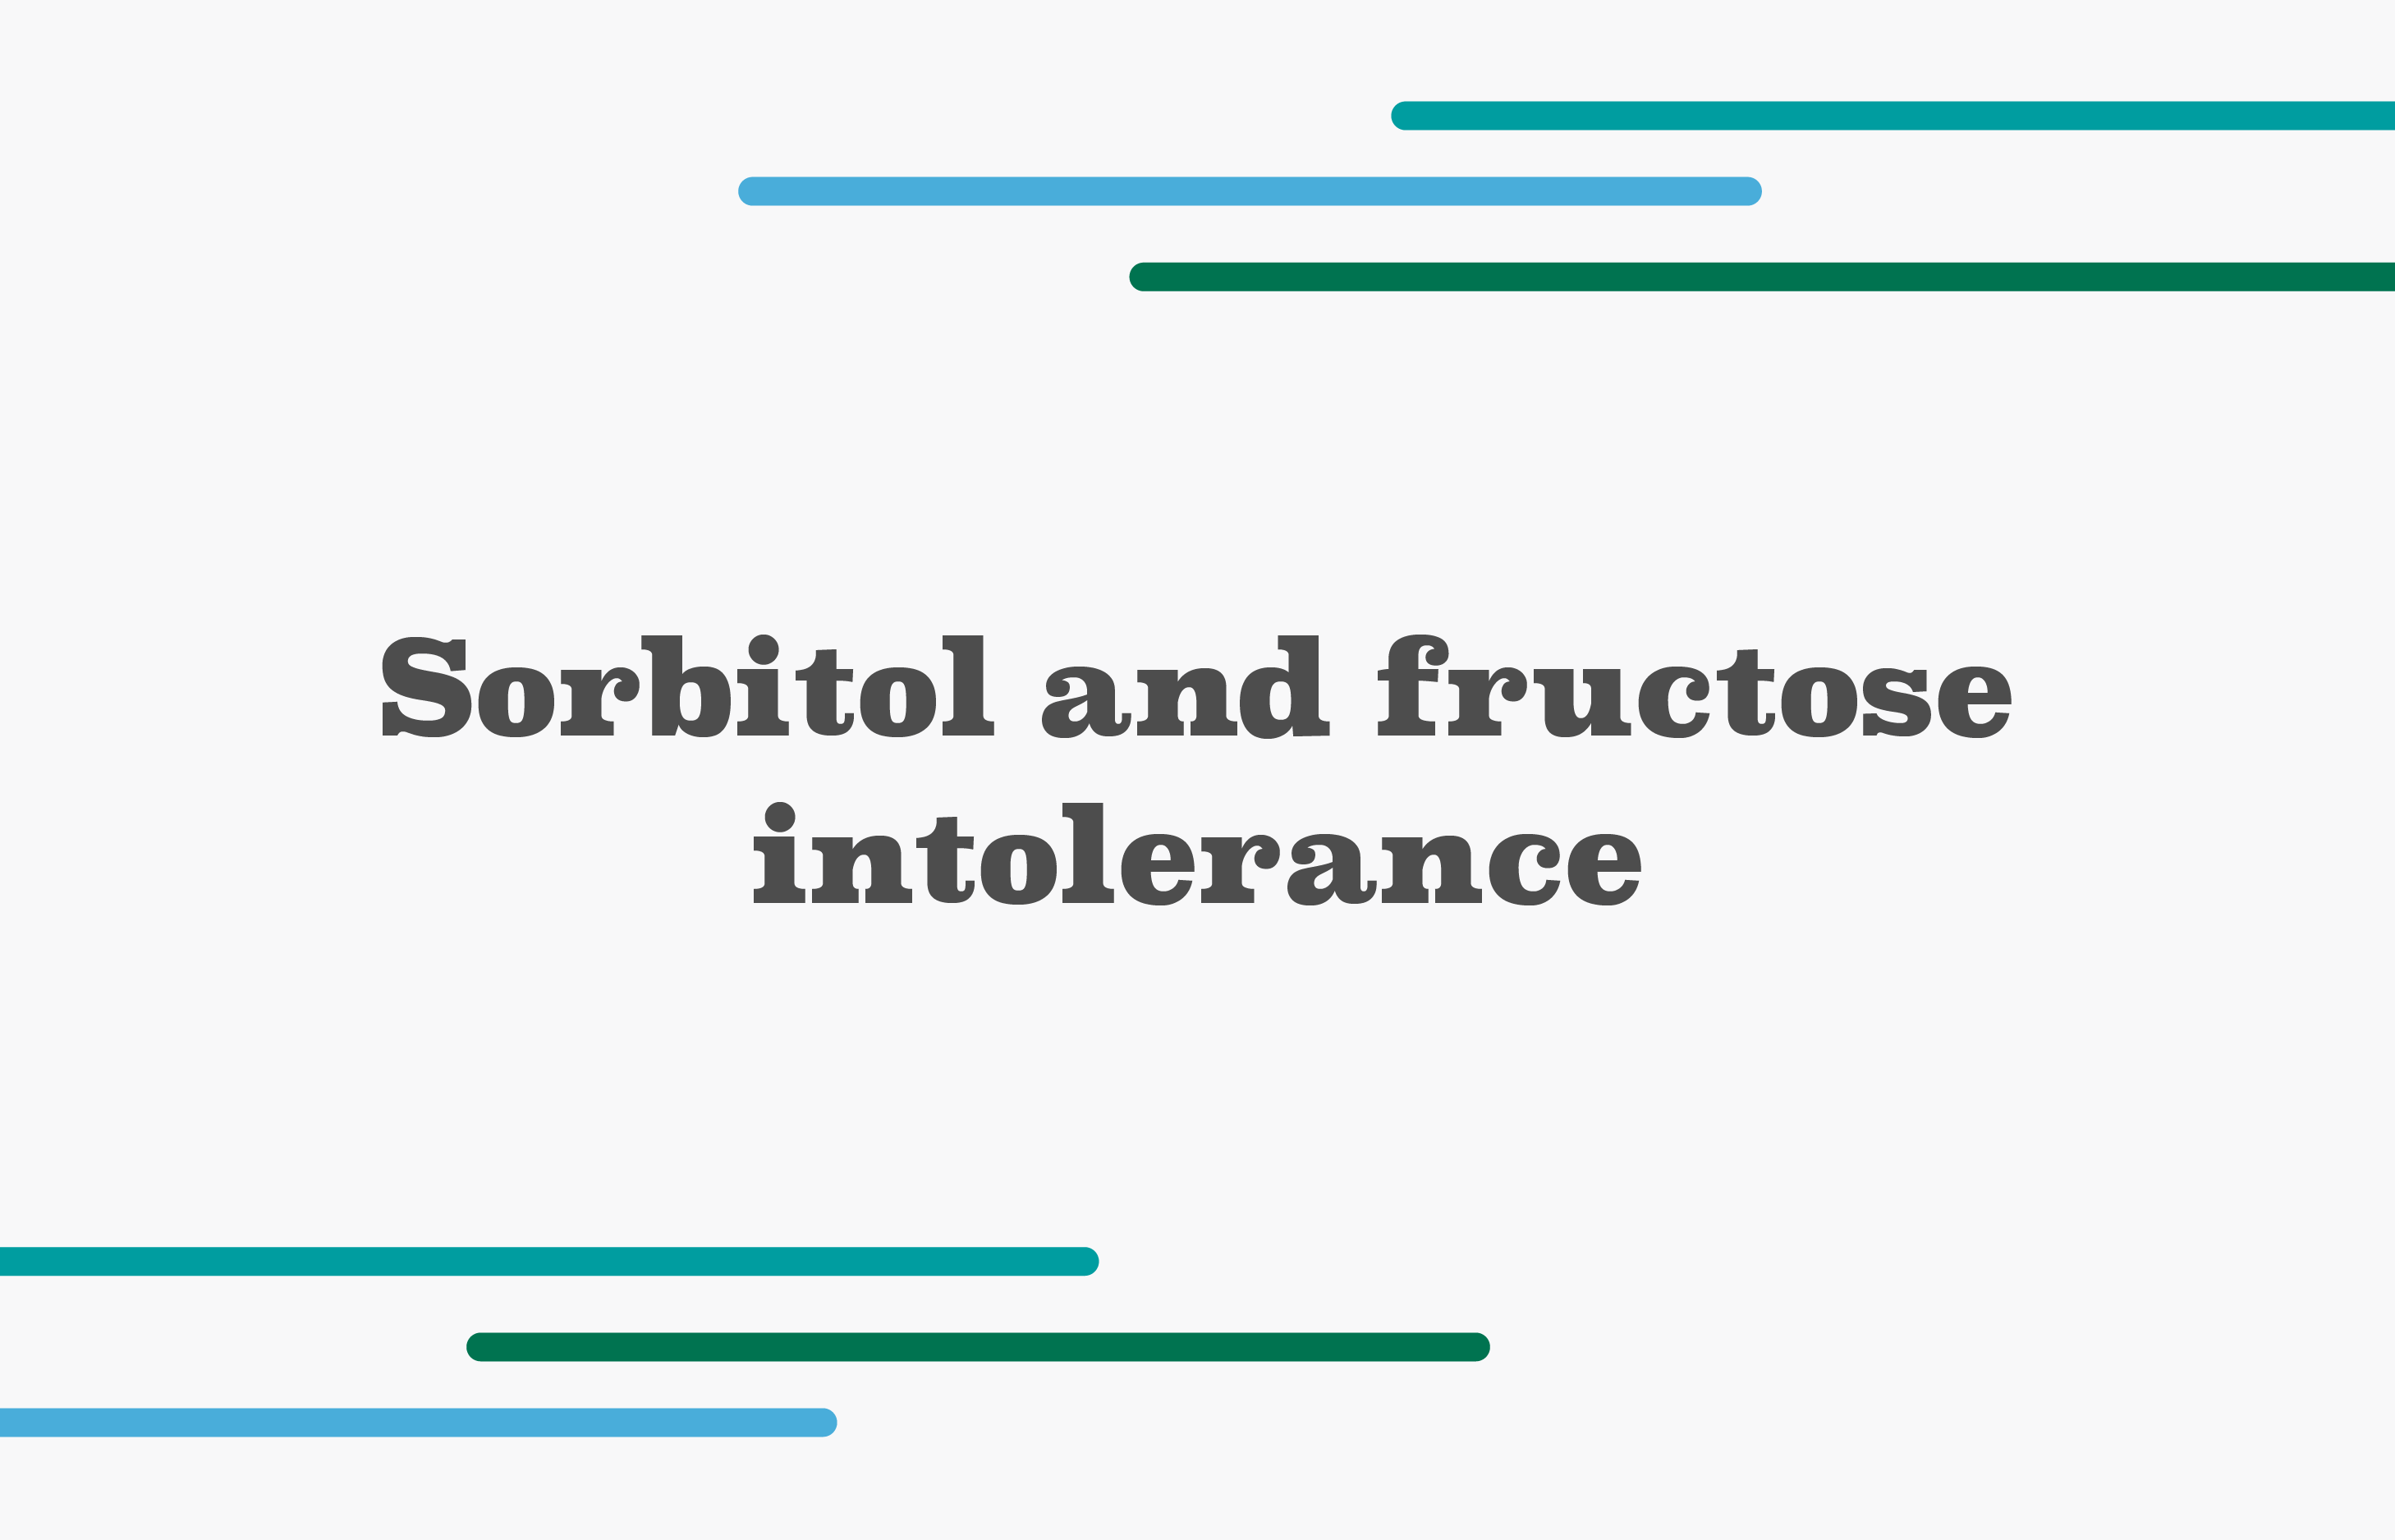 Sorbitol and fructose intolerance